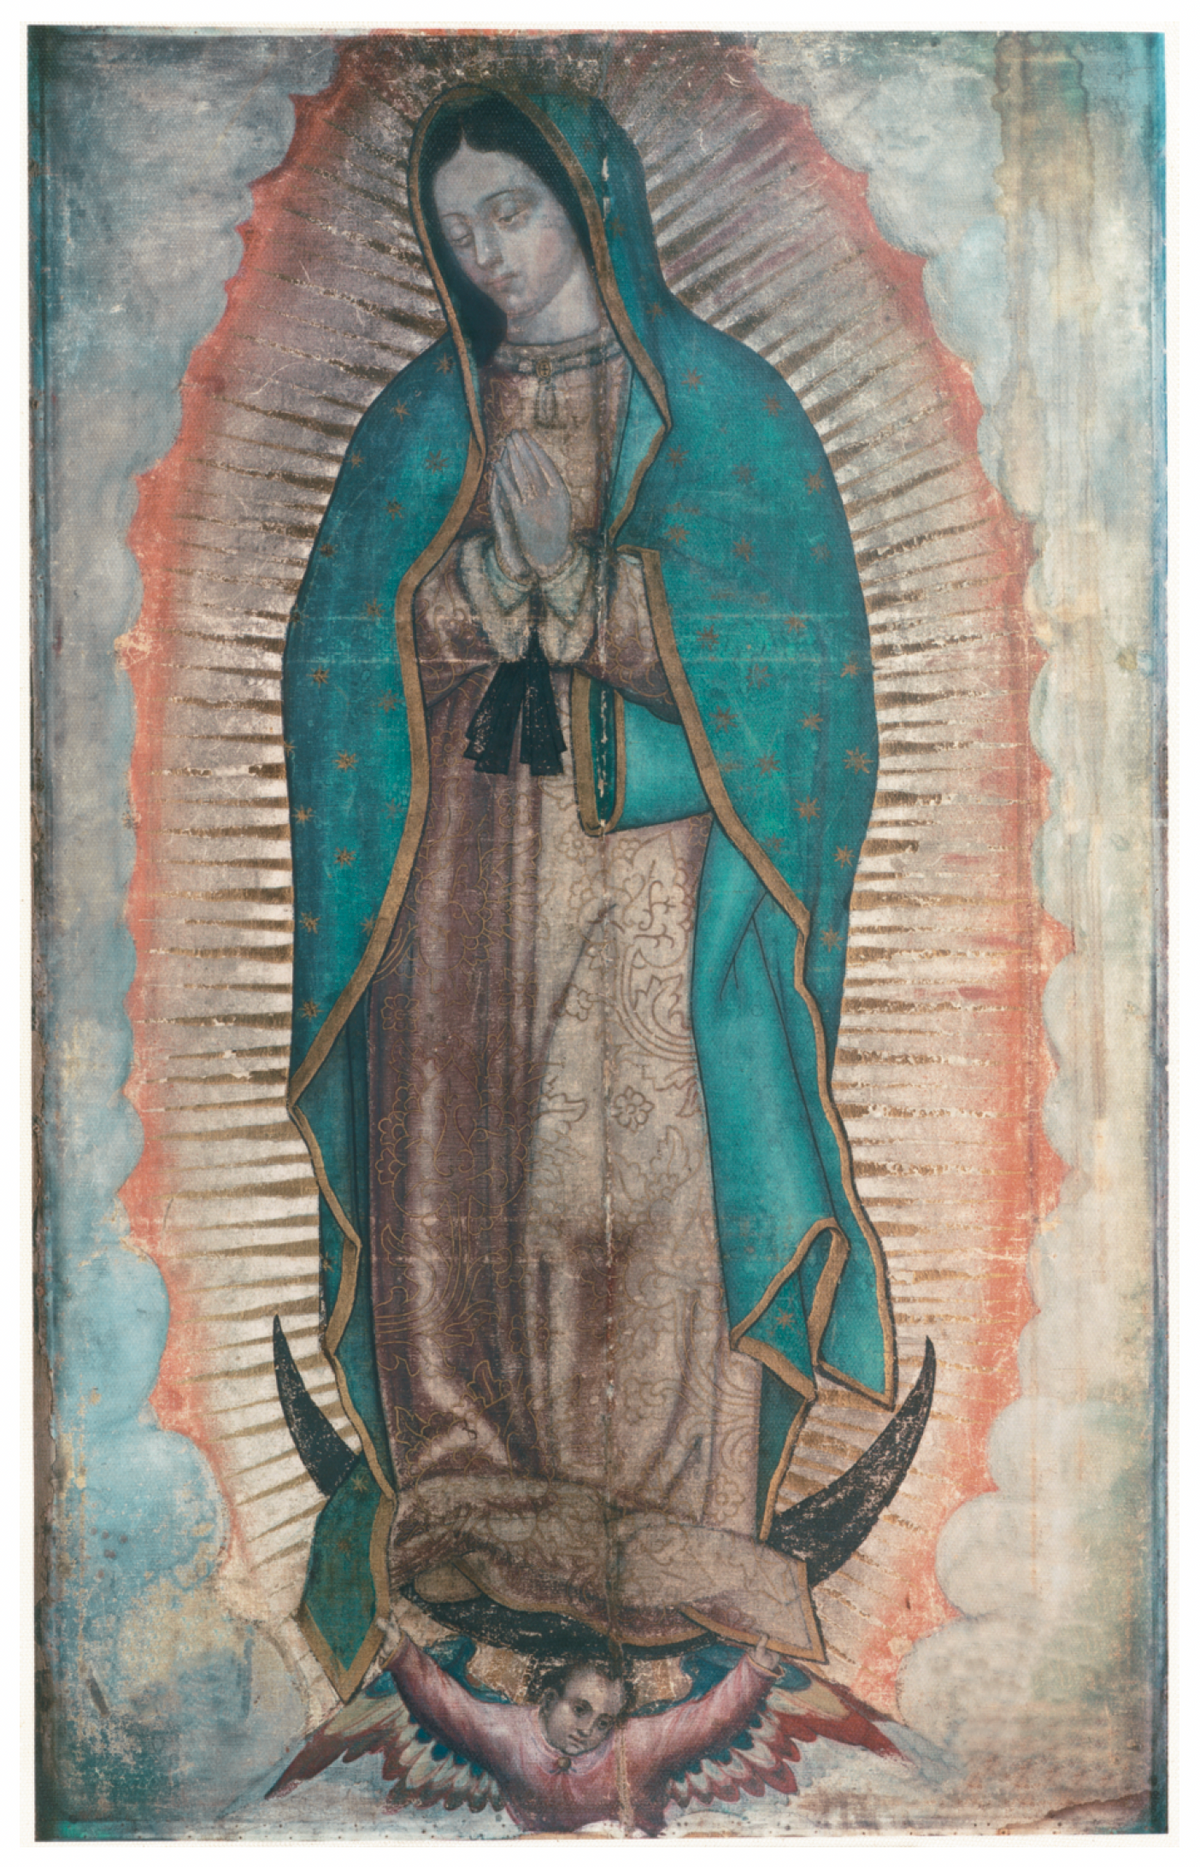 Our Lady of Guadalupe – The Magnificant - Packet of 100